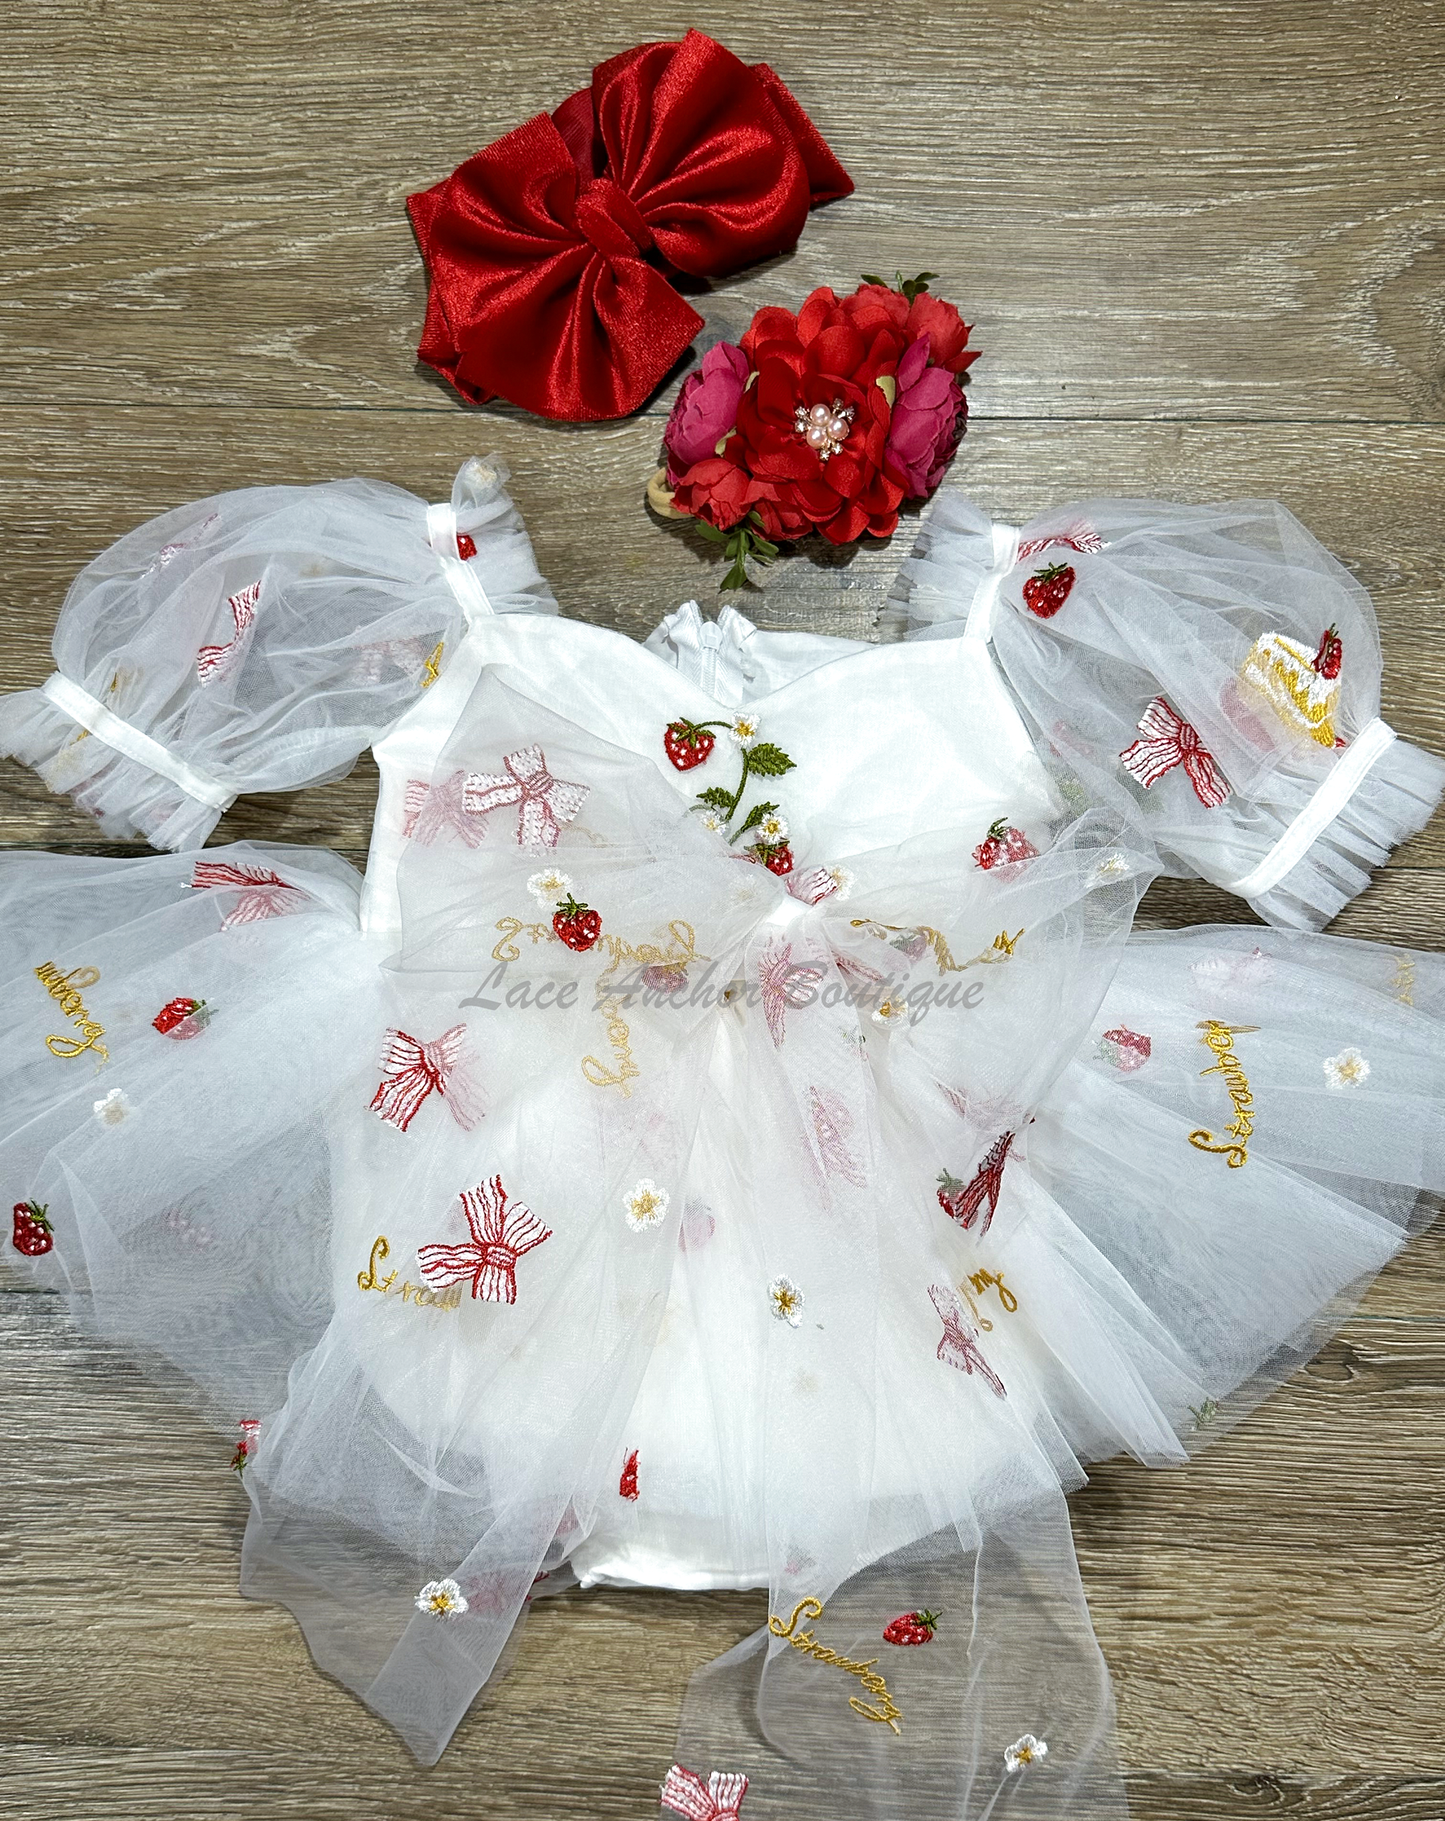 white romper with strawberries, bows, and strawberry shortcake embroidered print with large fluffy tied bow and puff sleeves.